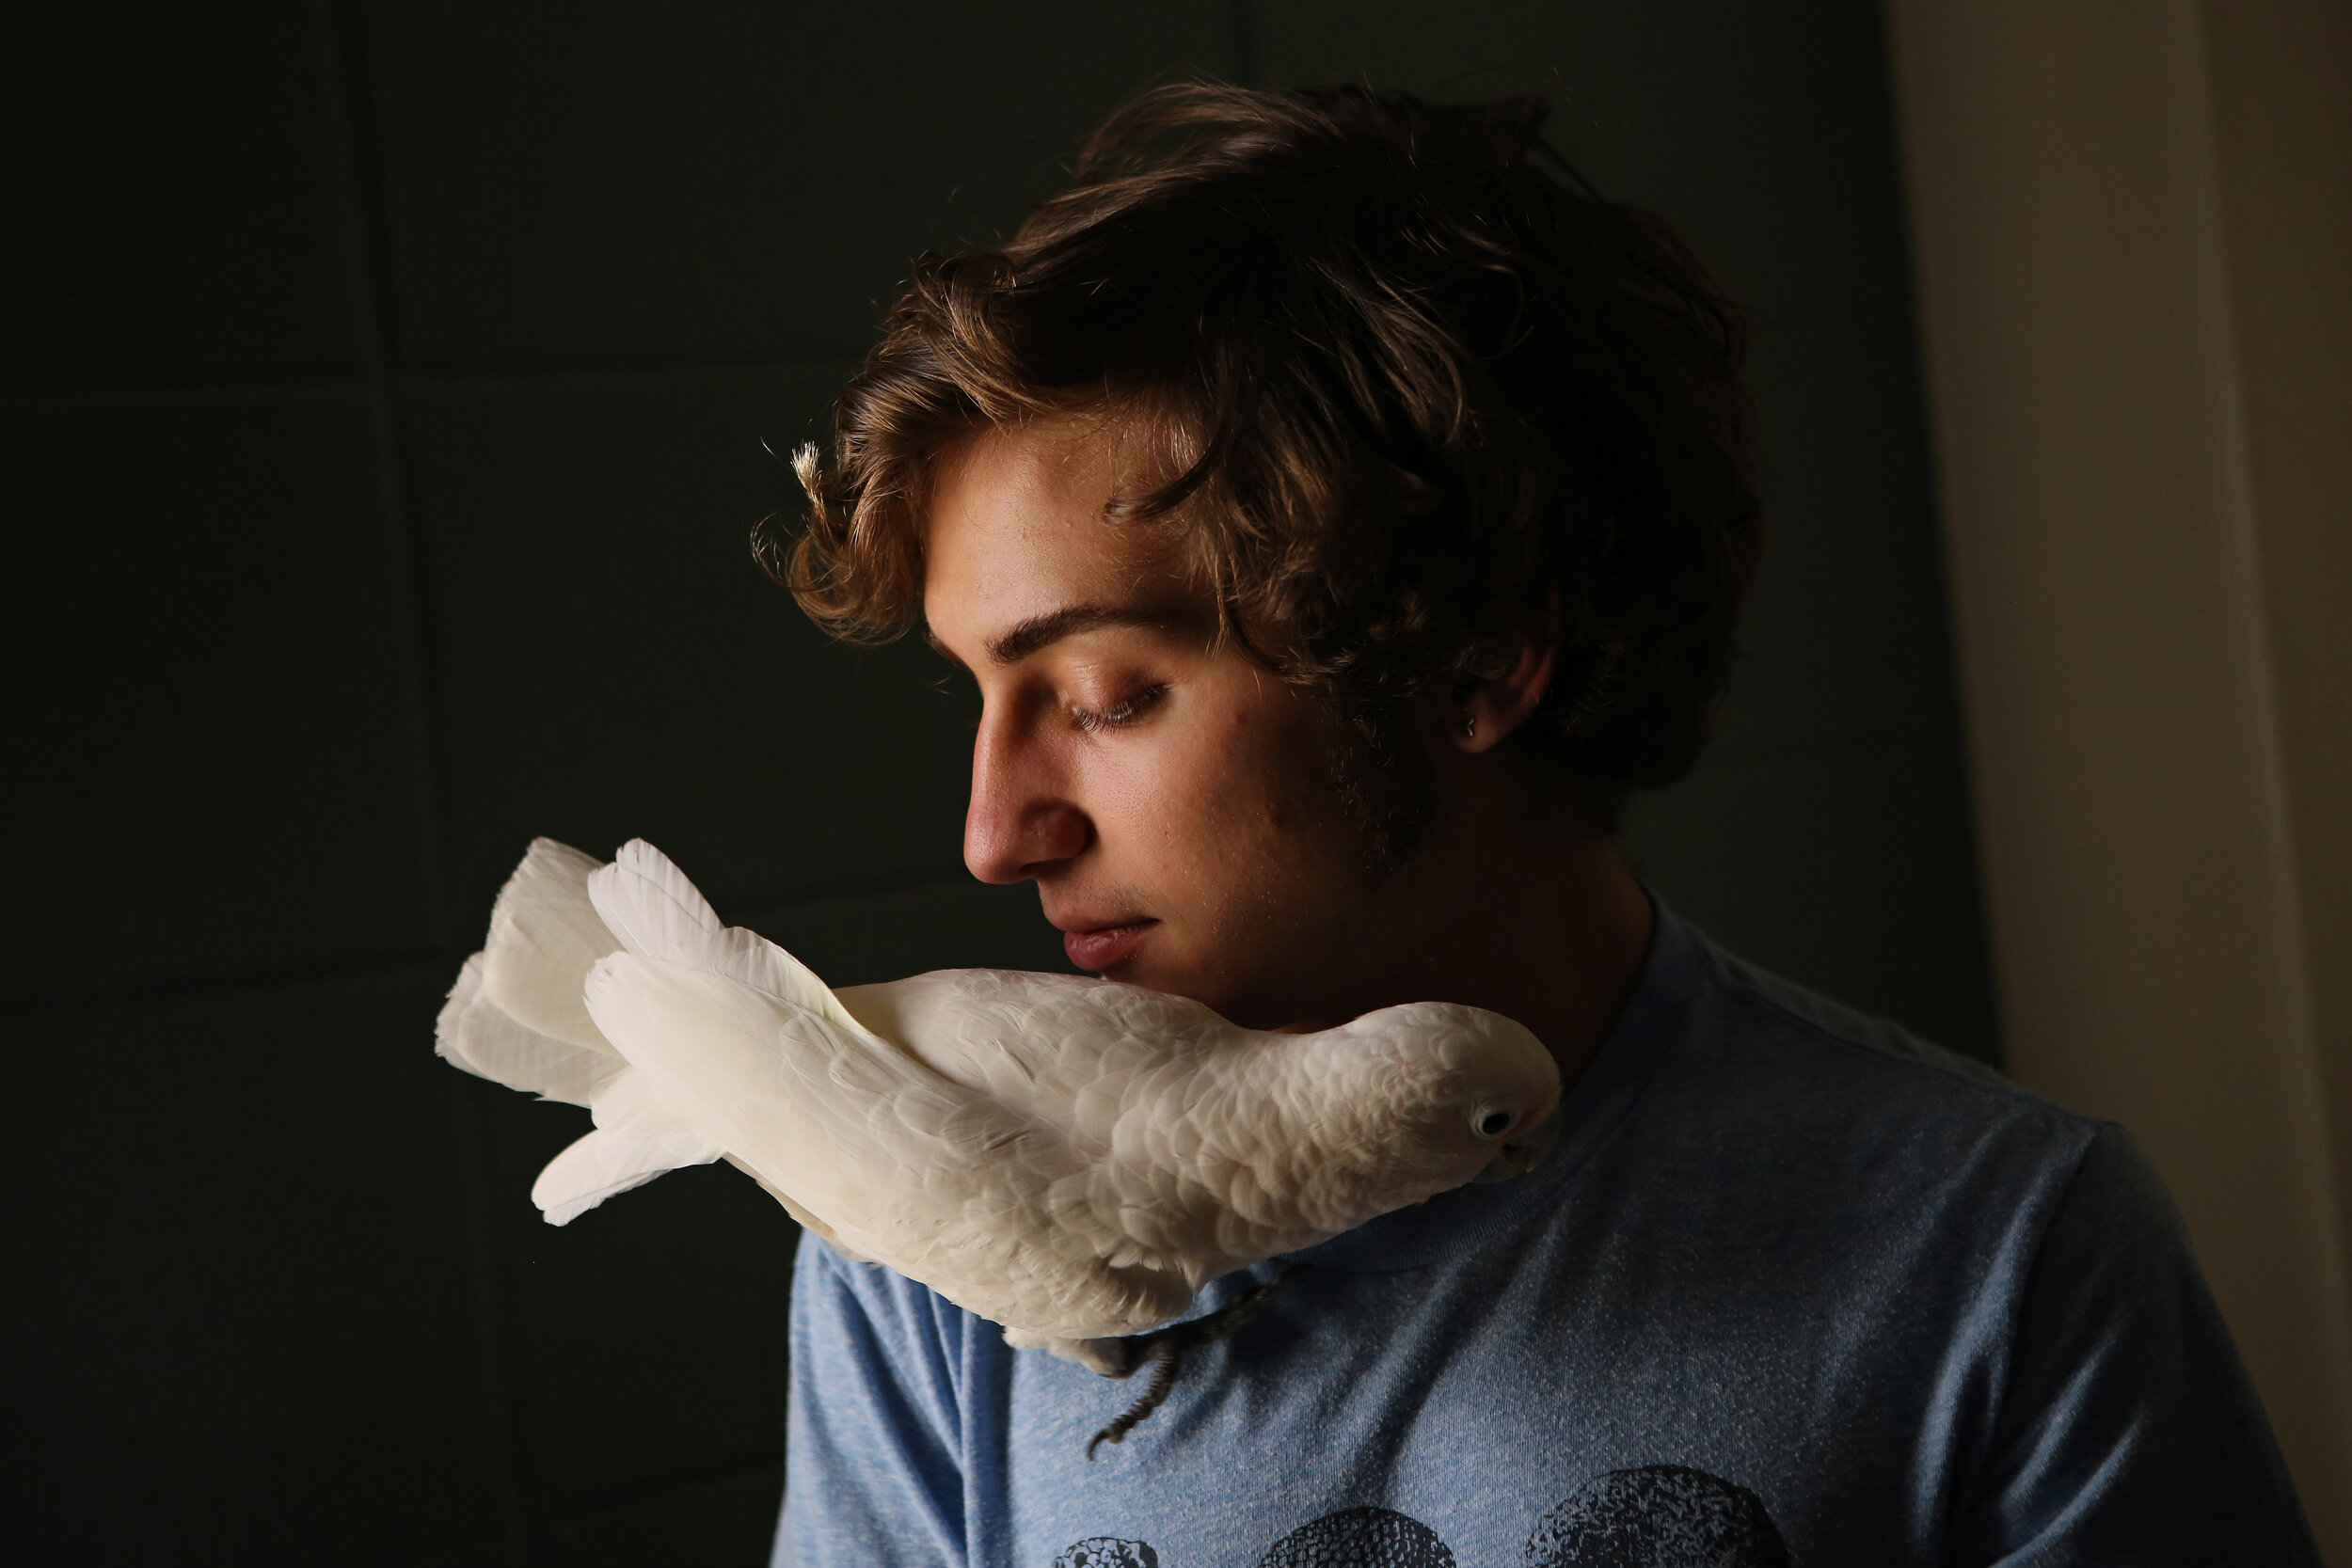  Biology freshman Brady Lee shares a moment with his emotional support cockatoo. Alpine — or Al for short —  is therapeutic to his social anxiety and depression.  Thalia Juarez/The Daily Texan  